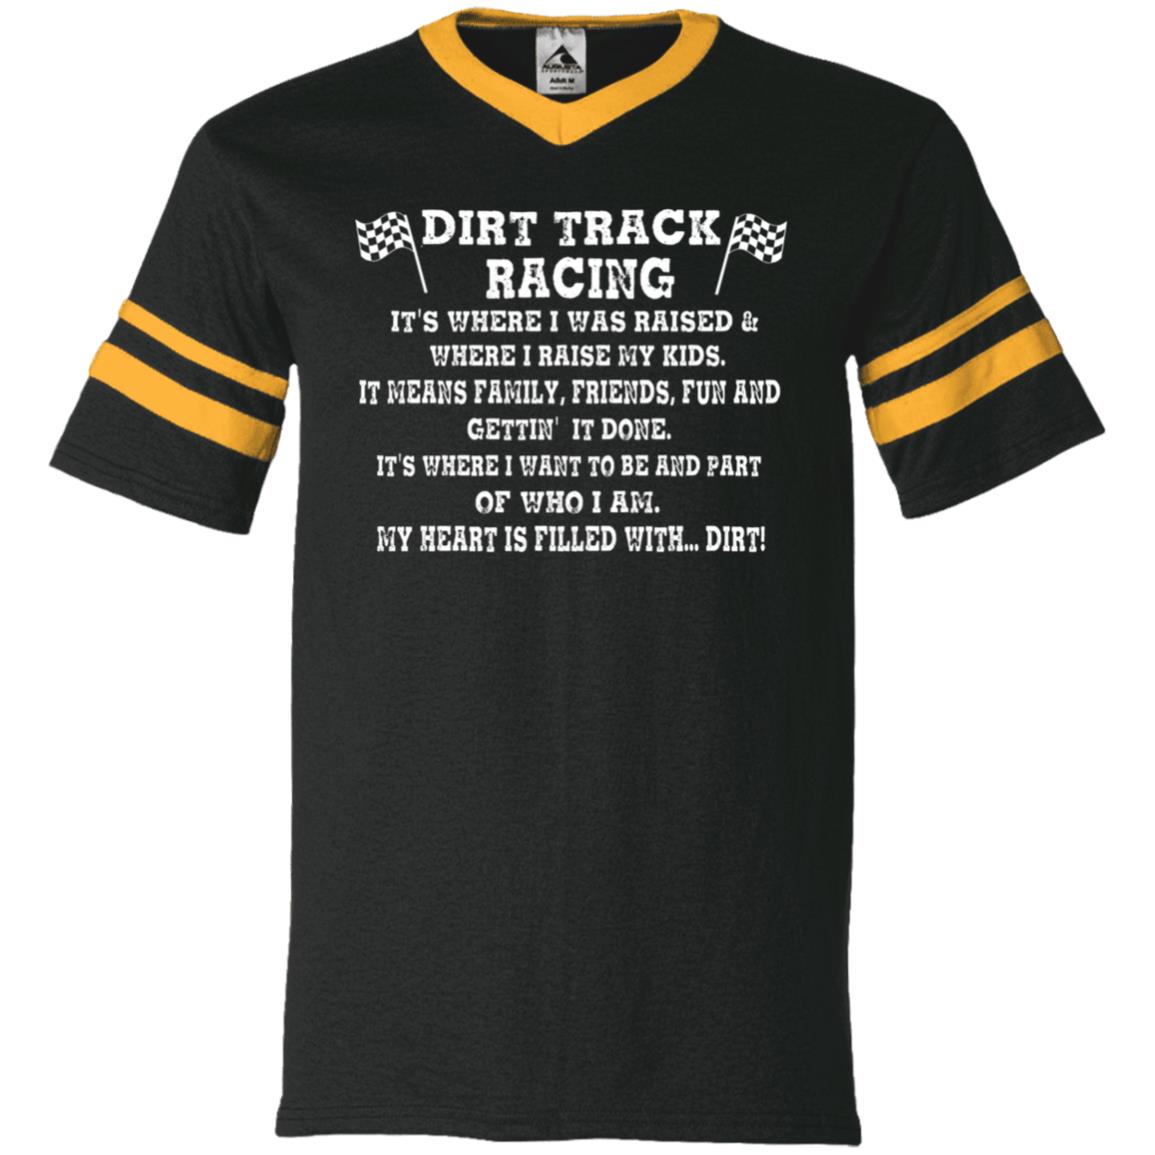 Dirt Track Racing It's Where I Was Raised V-Neck Sleeve Stripe Jersey